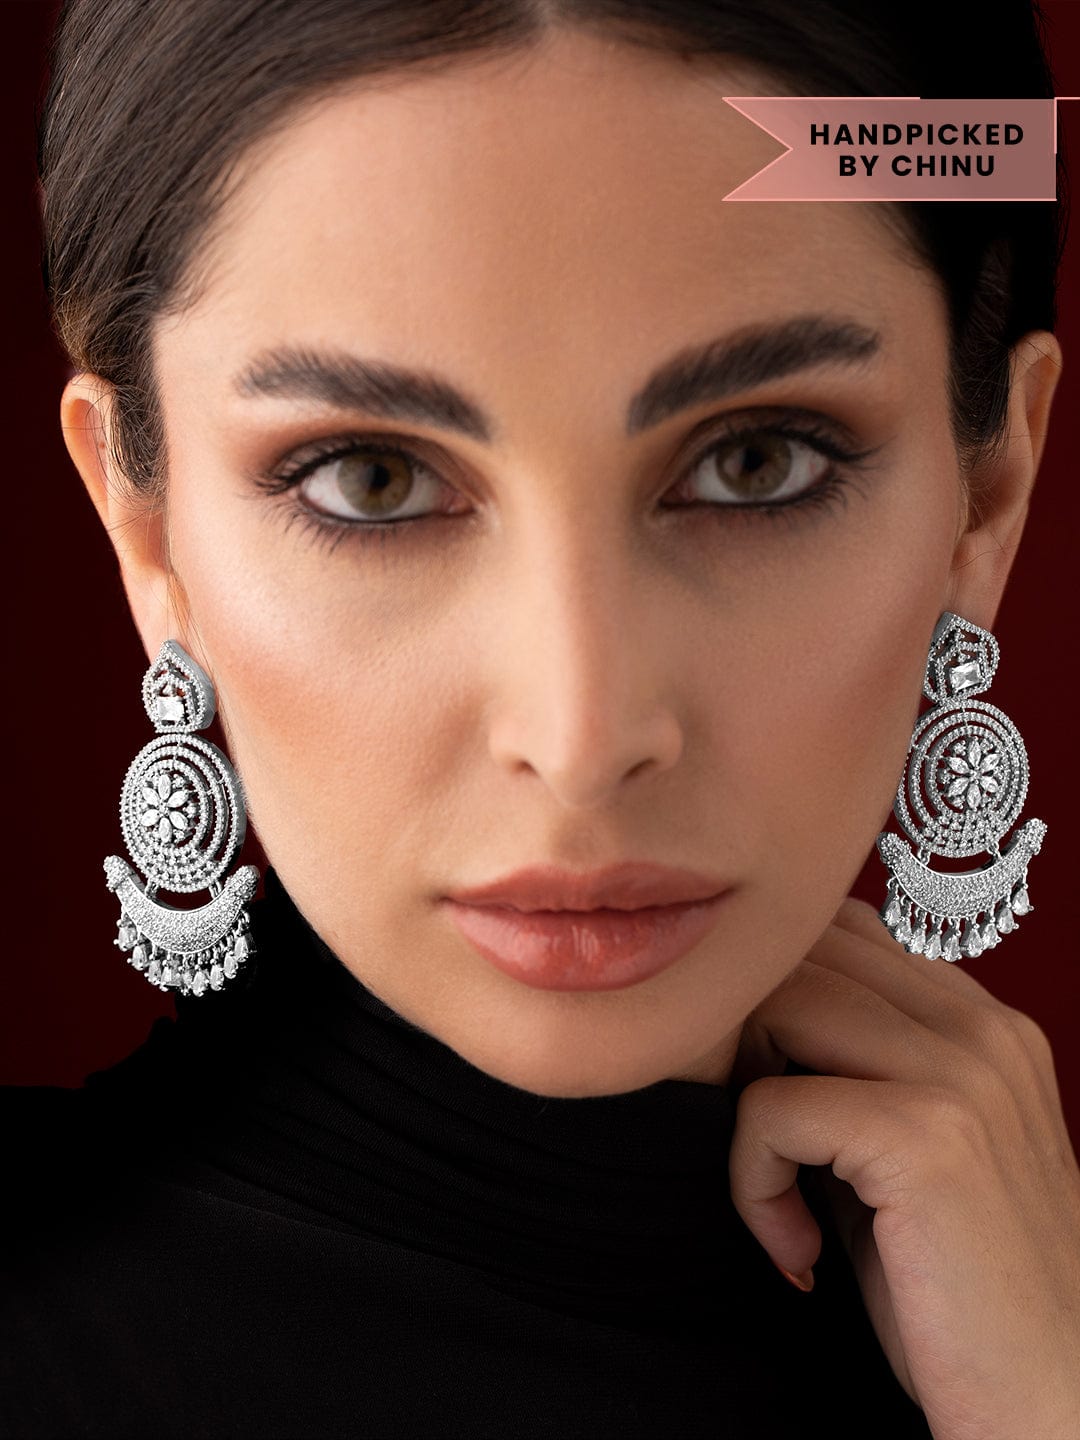 Rubans Silver Plated American Diamond Earrings With Studded Stones. Earrings